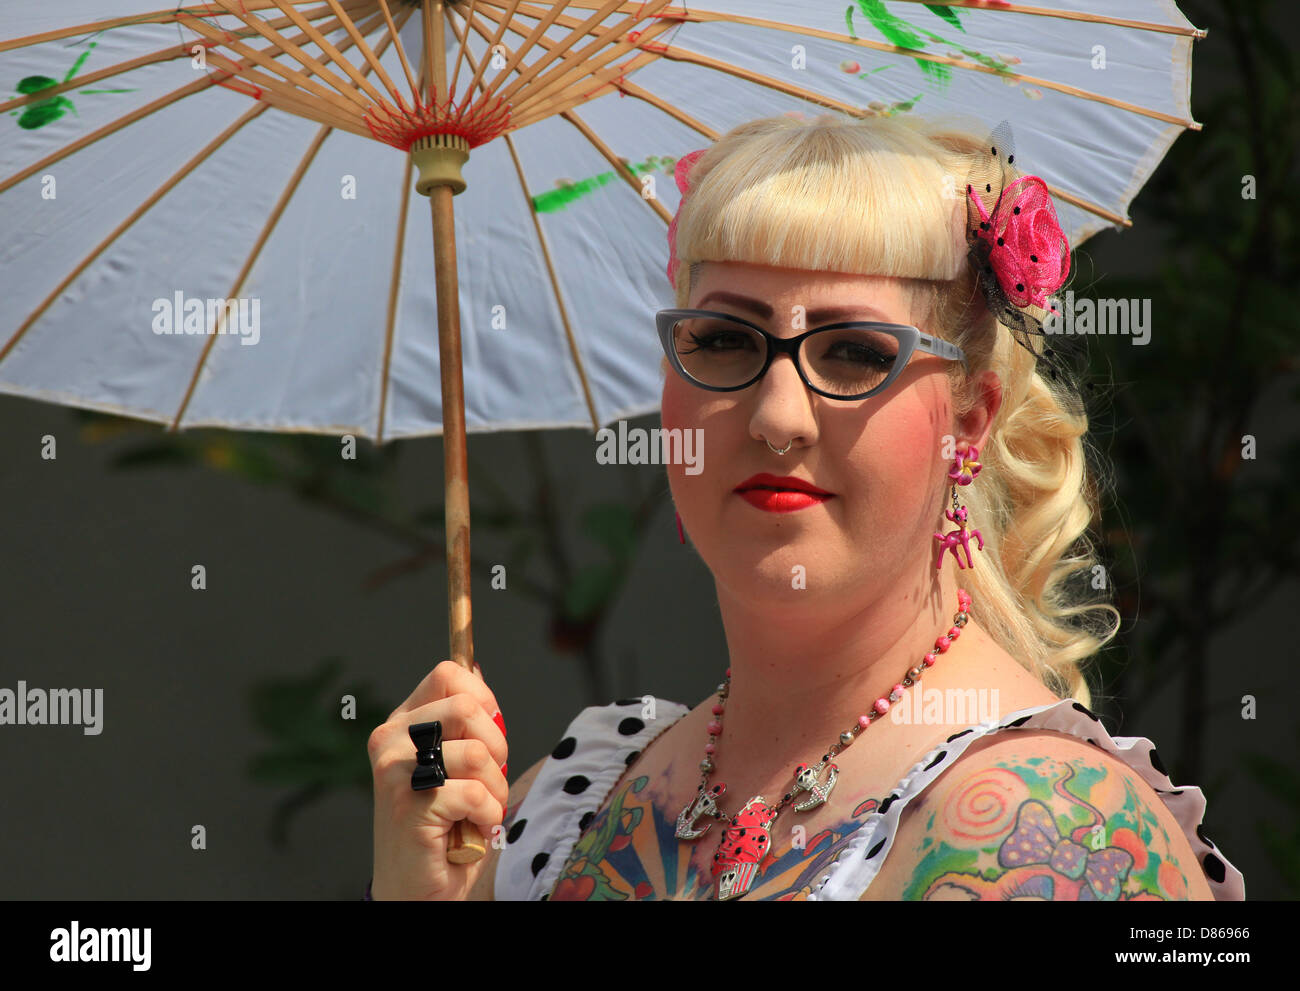 Trendy blond girl with sun umbrella seen at the annual open air art and music festival Wave-Gotik-Treffen in Leipzig, Germany. Stock Photo